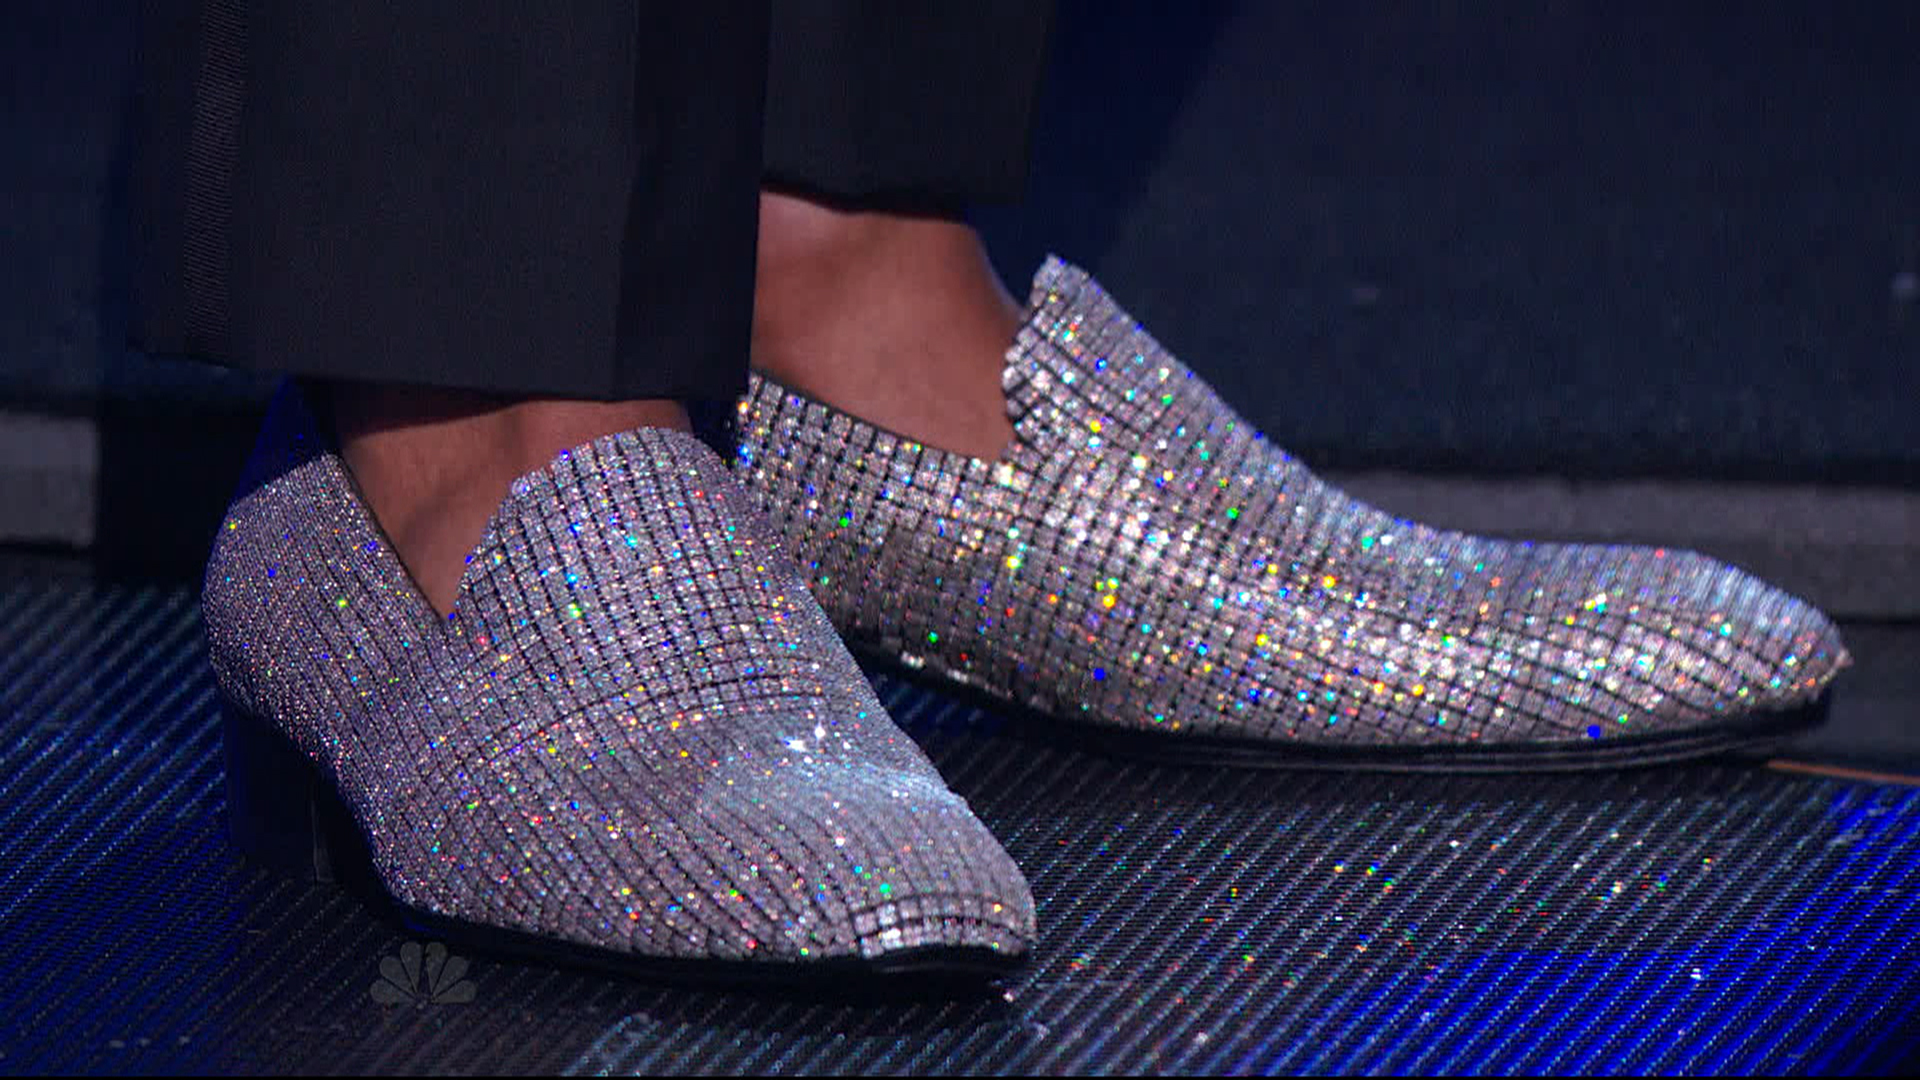 Nick Cannon sports $2 million shoes on 'AGT' finale - TODAY.com1920 x 1080